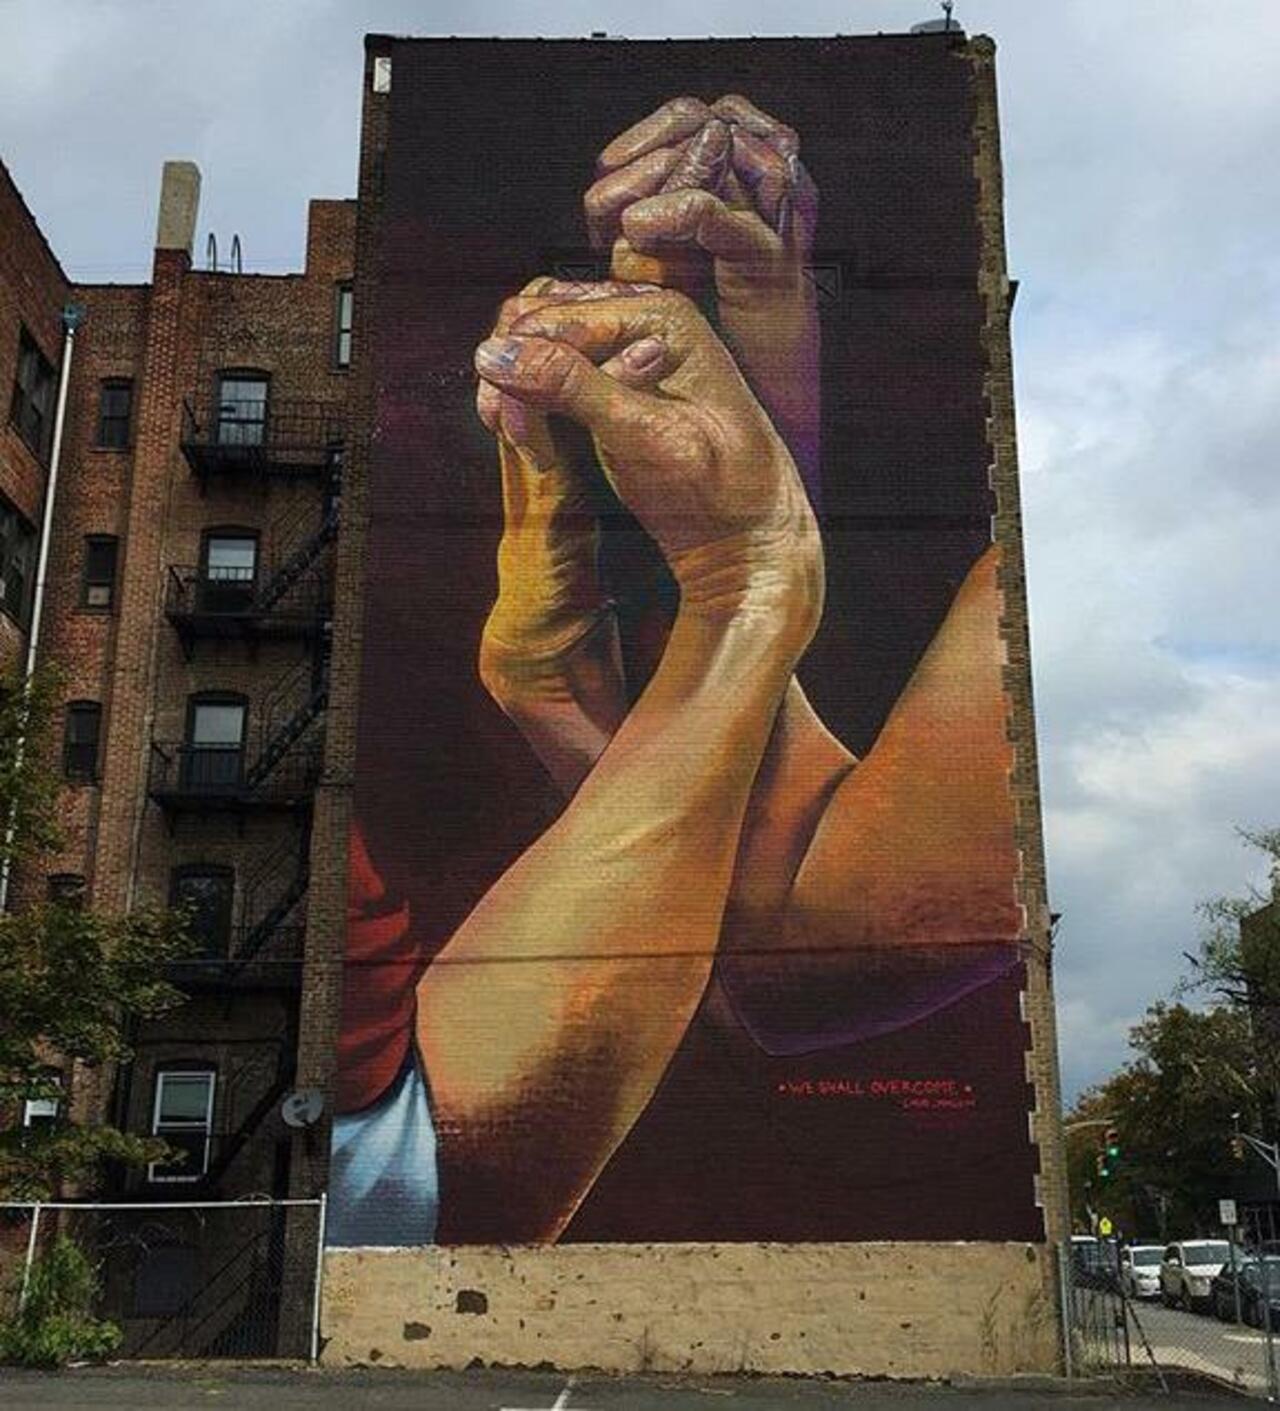 New Street Art by CaseMaclaim in Jersey City for the TheBKcollective 

#art #graffiti #mural #streetart http://t.co/L4riSkW2Qy